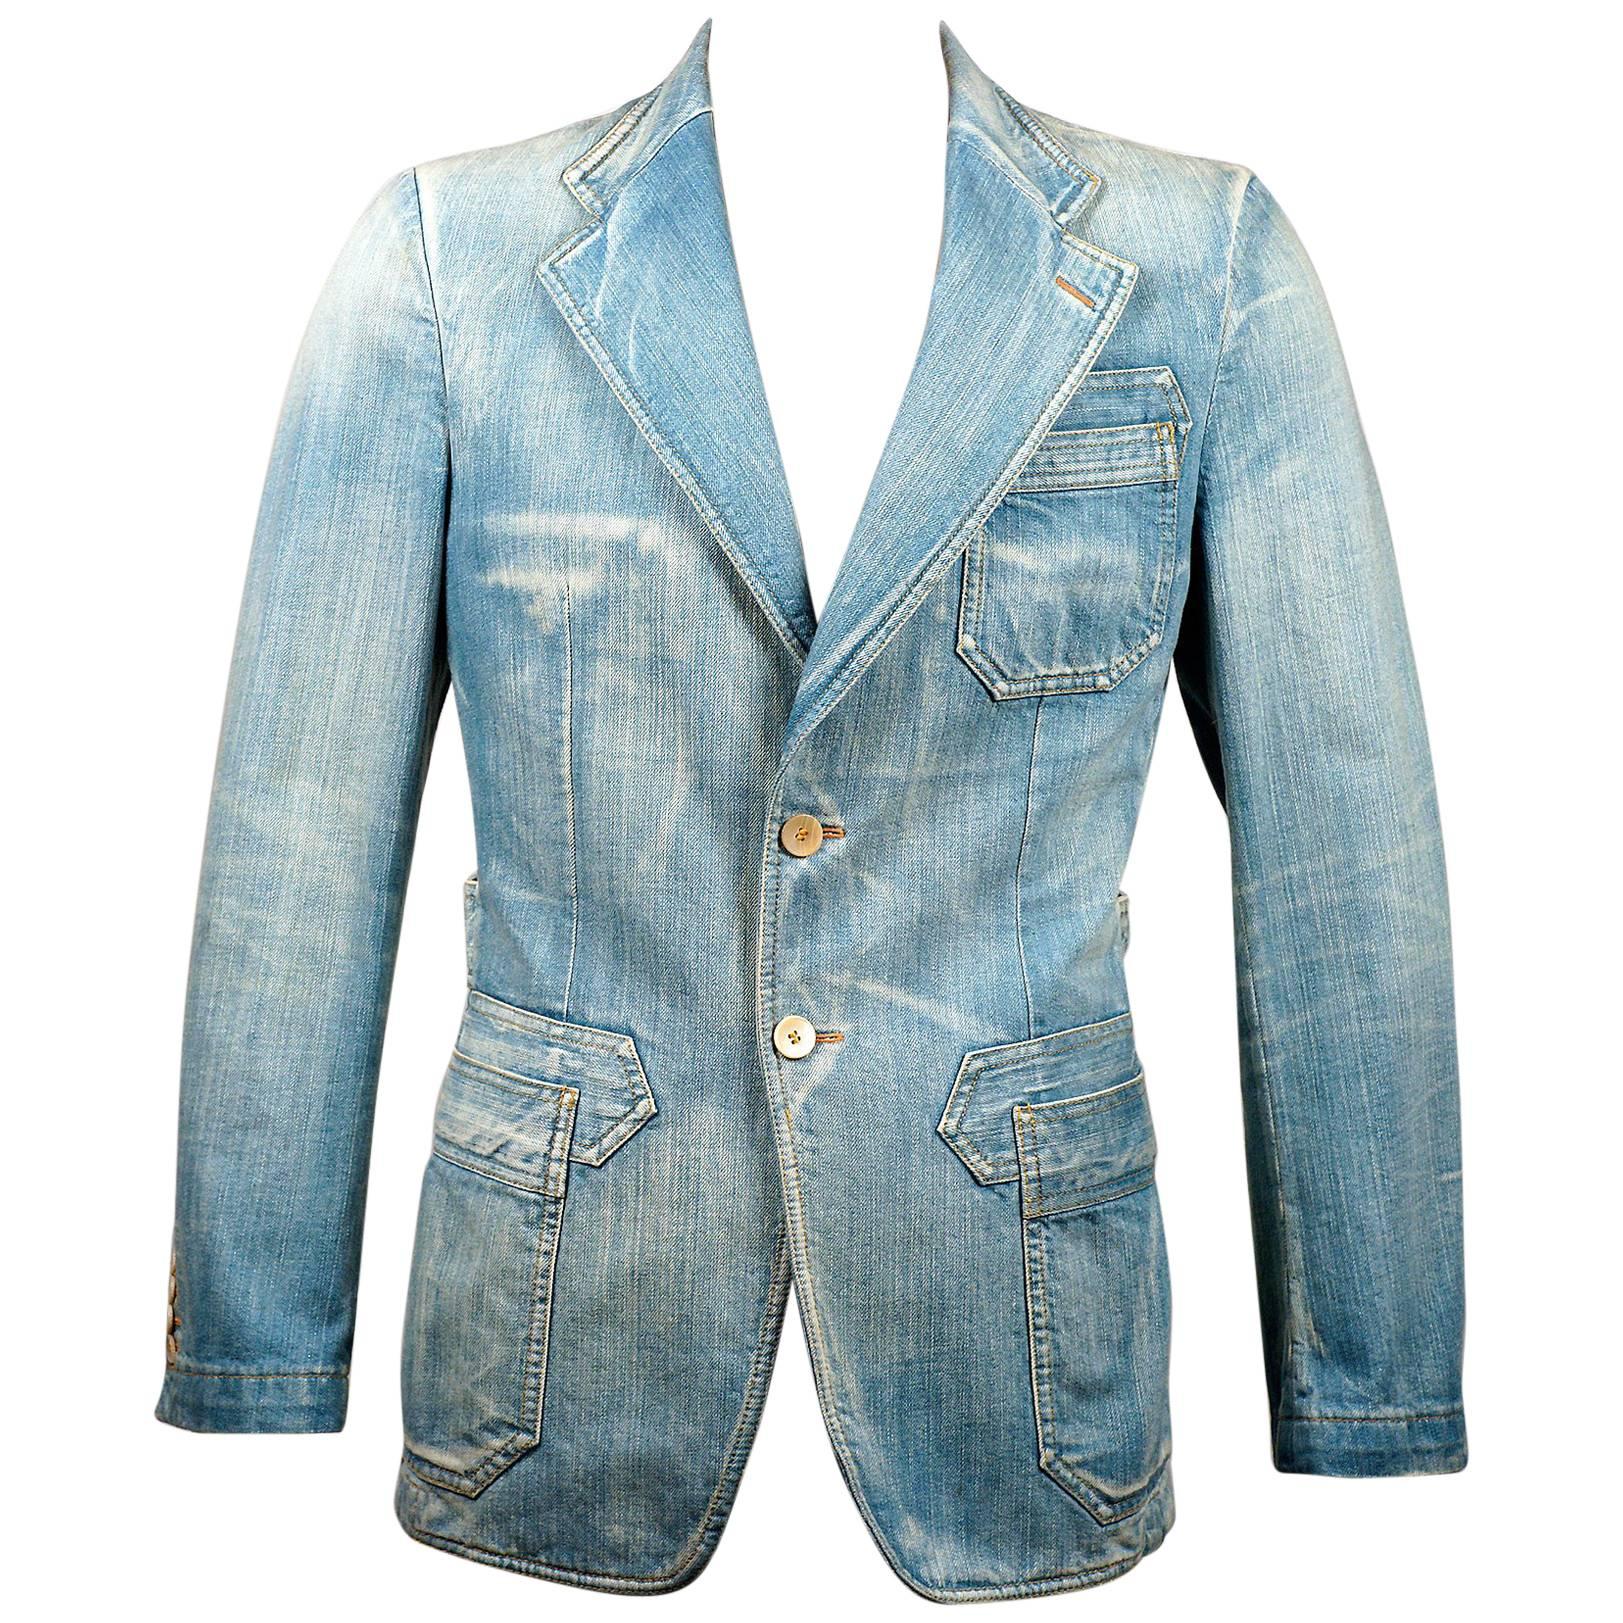 Tom Ford for Gucci Distressed Tailored Denim Jacket